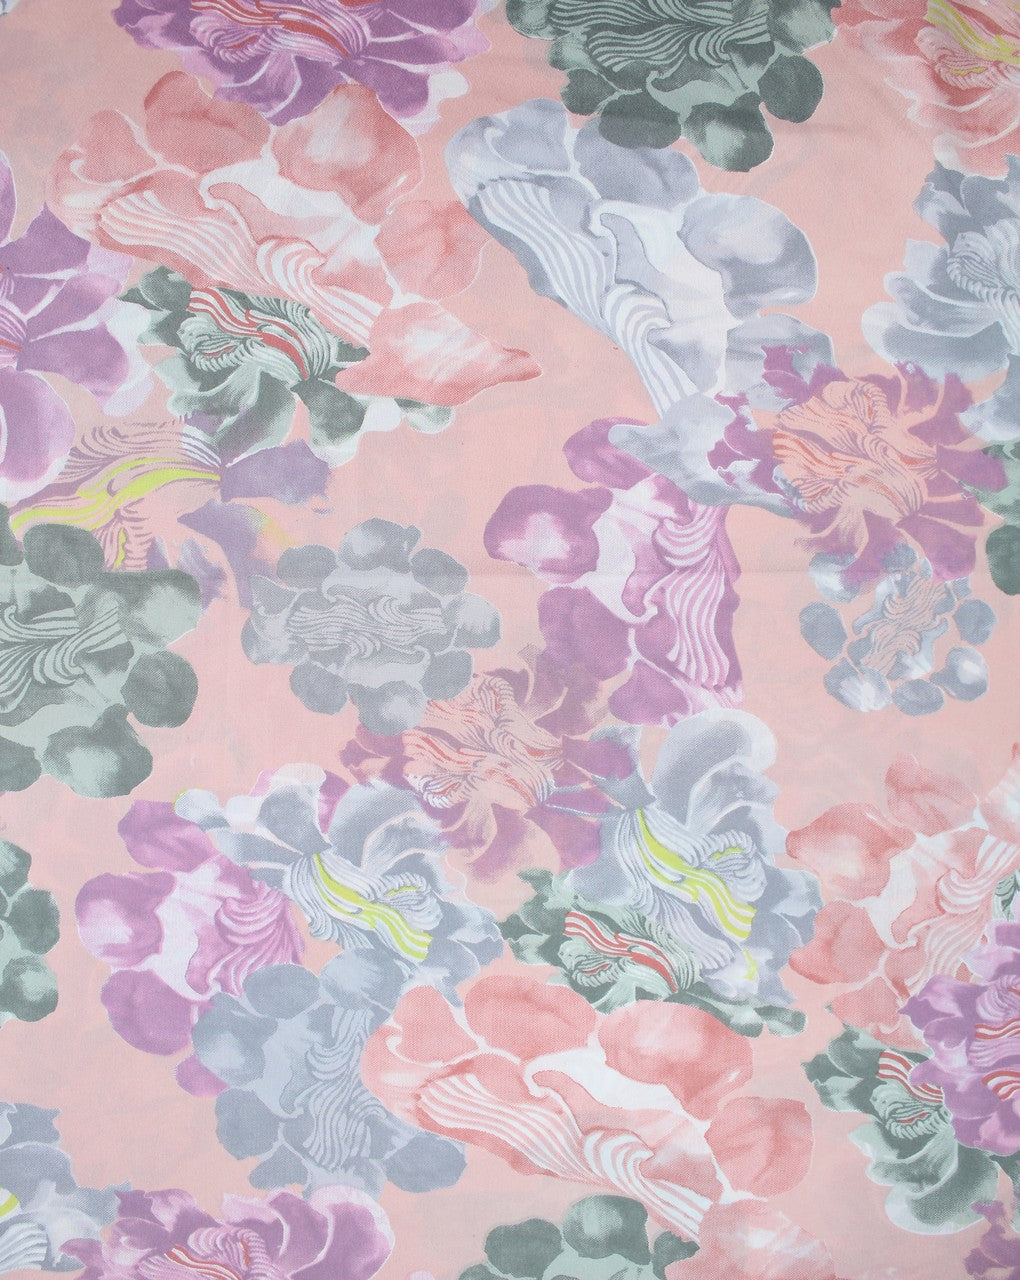 Peach And Multicolor Floral Design 1 Polyester Crepe Fabric